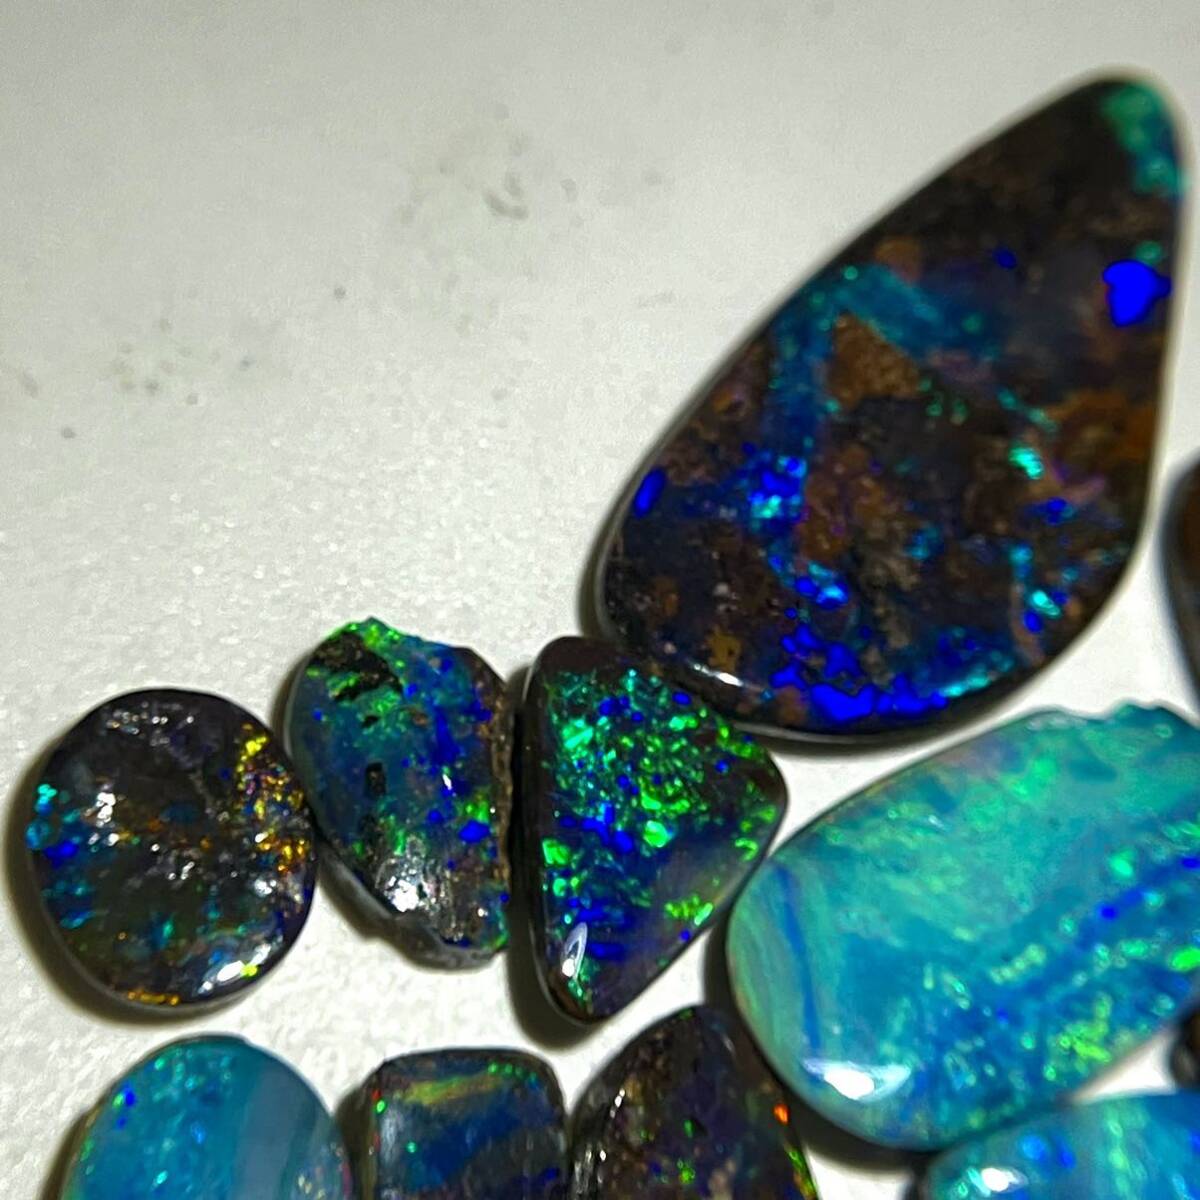 . color effect!![ natural boruda- opal . summarize 50ct]m weight approximately 10g loose unset jewel gem jewelry jewelry boulder opal. color rainbow DB0